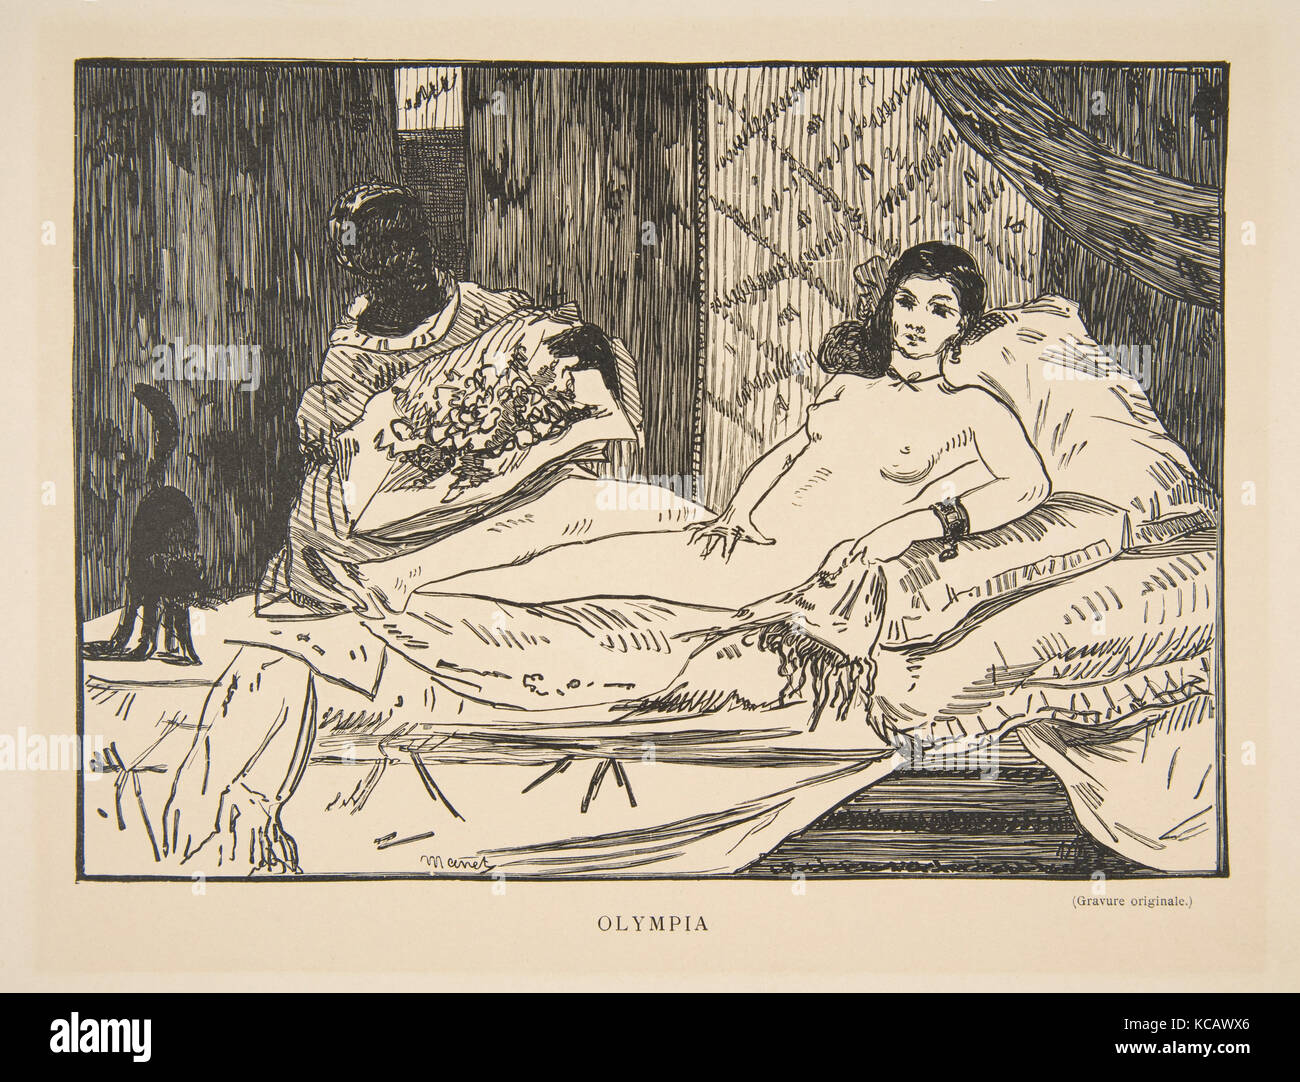 Olympia, published 1902, Wood engraving, image: 5 3/16 x 7 5/16 in. (13.2 x 18.5 cm), Prints, After Édouard Manet (French, Paris Stock Photo